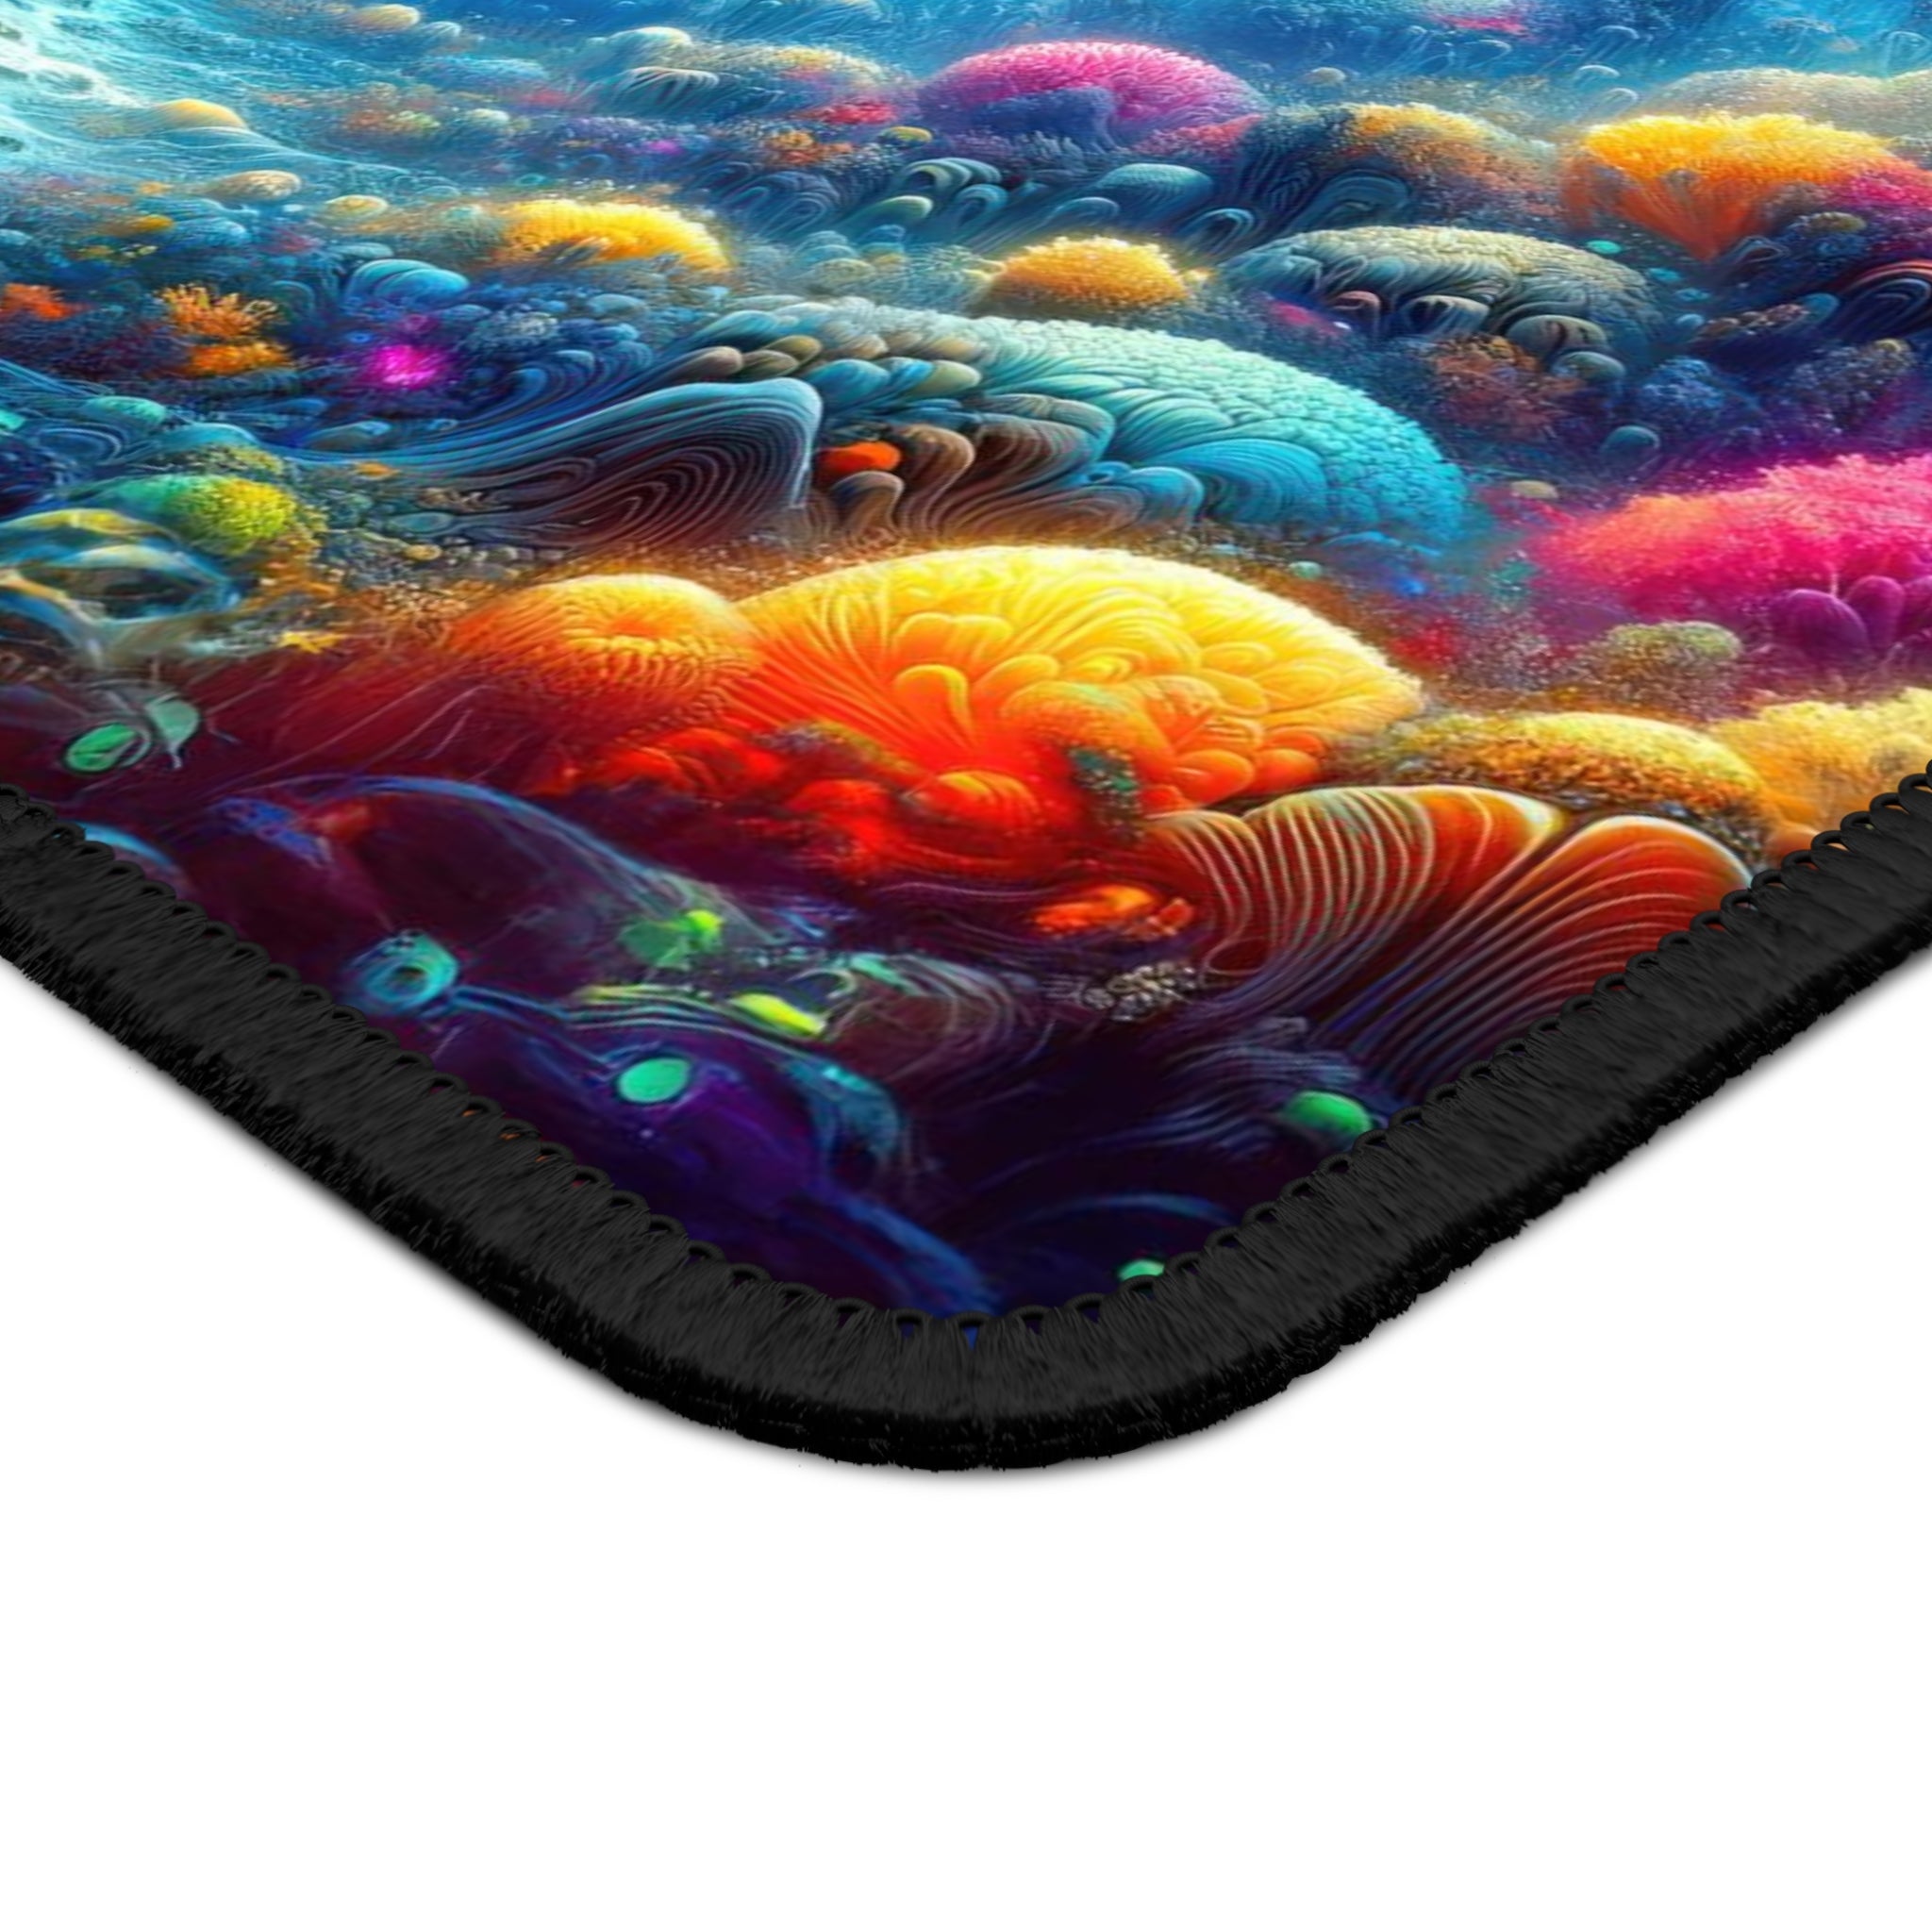 Nebula of the Deep Gaming Mouse Pad